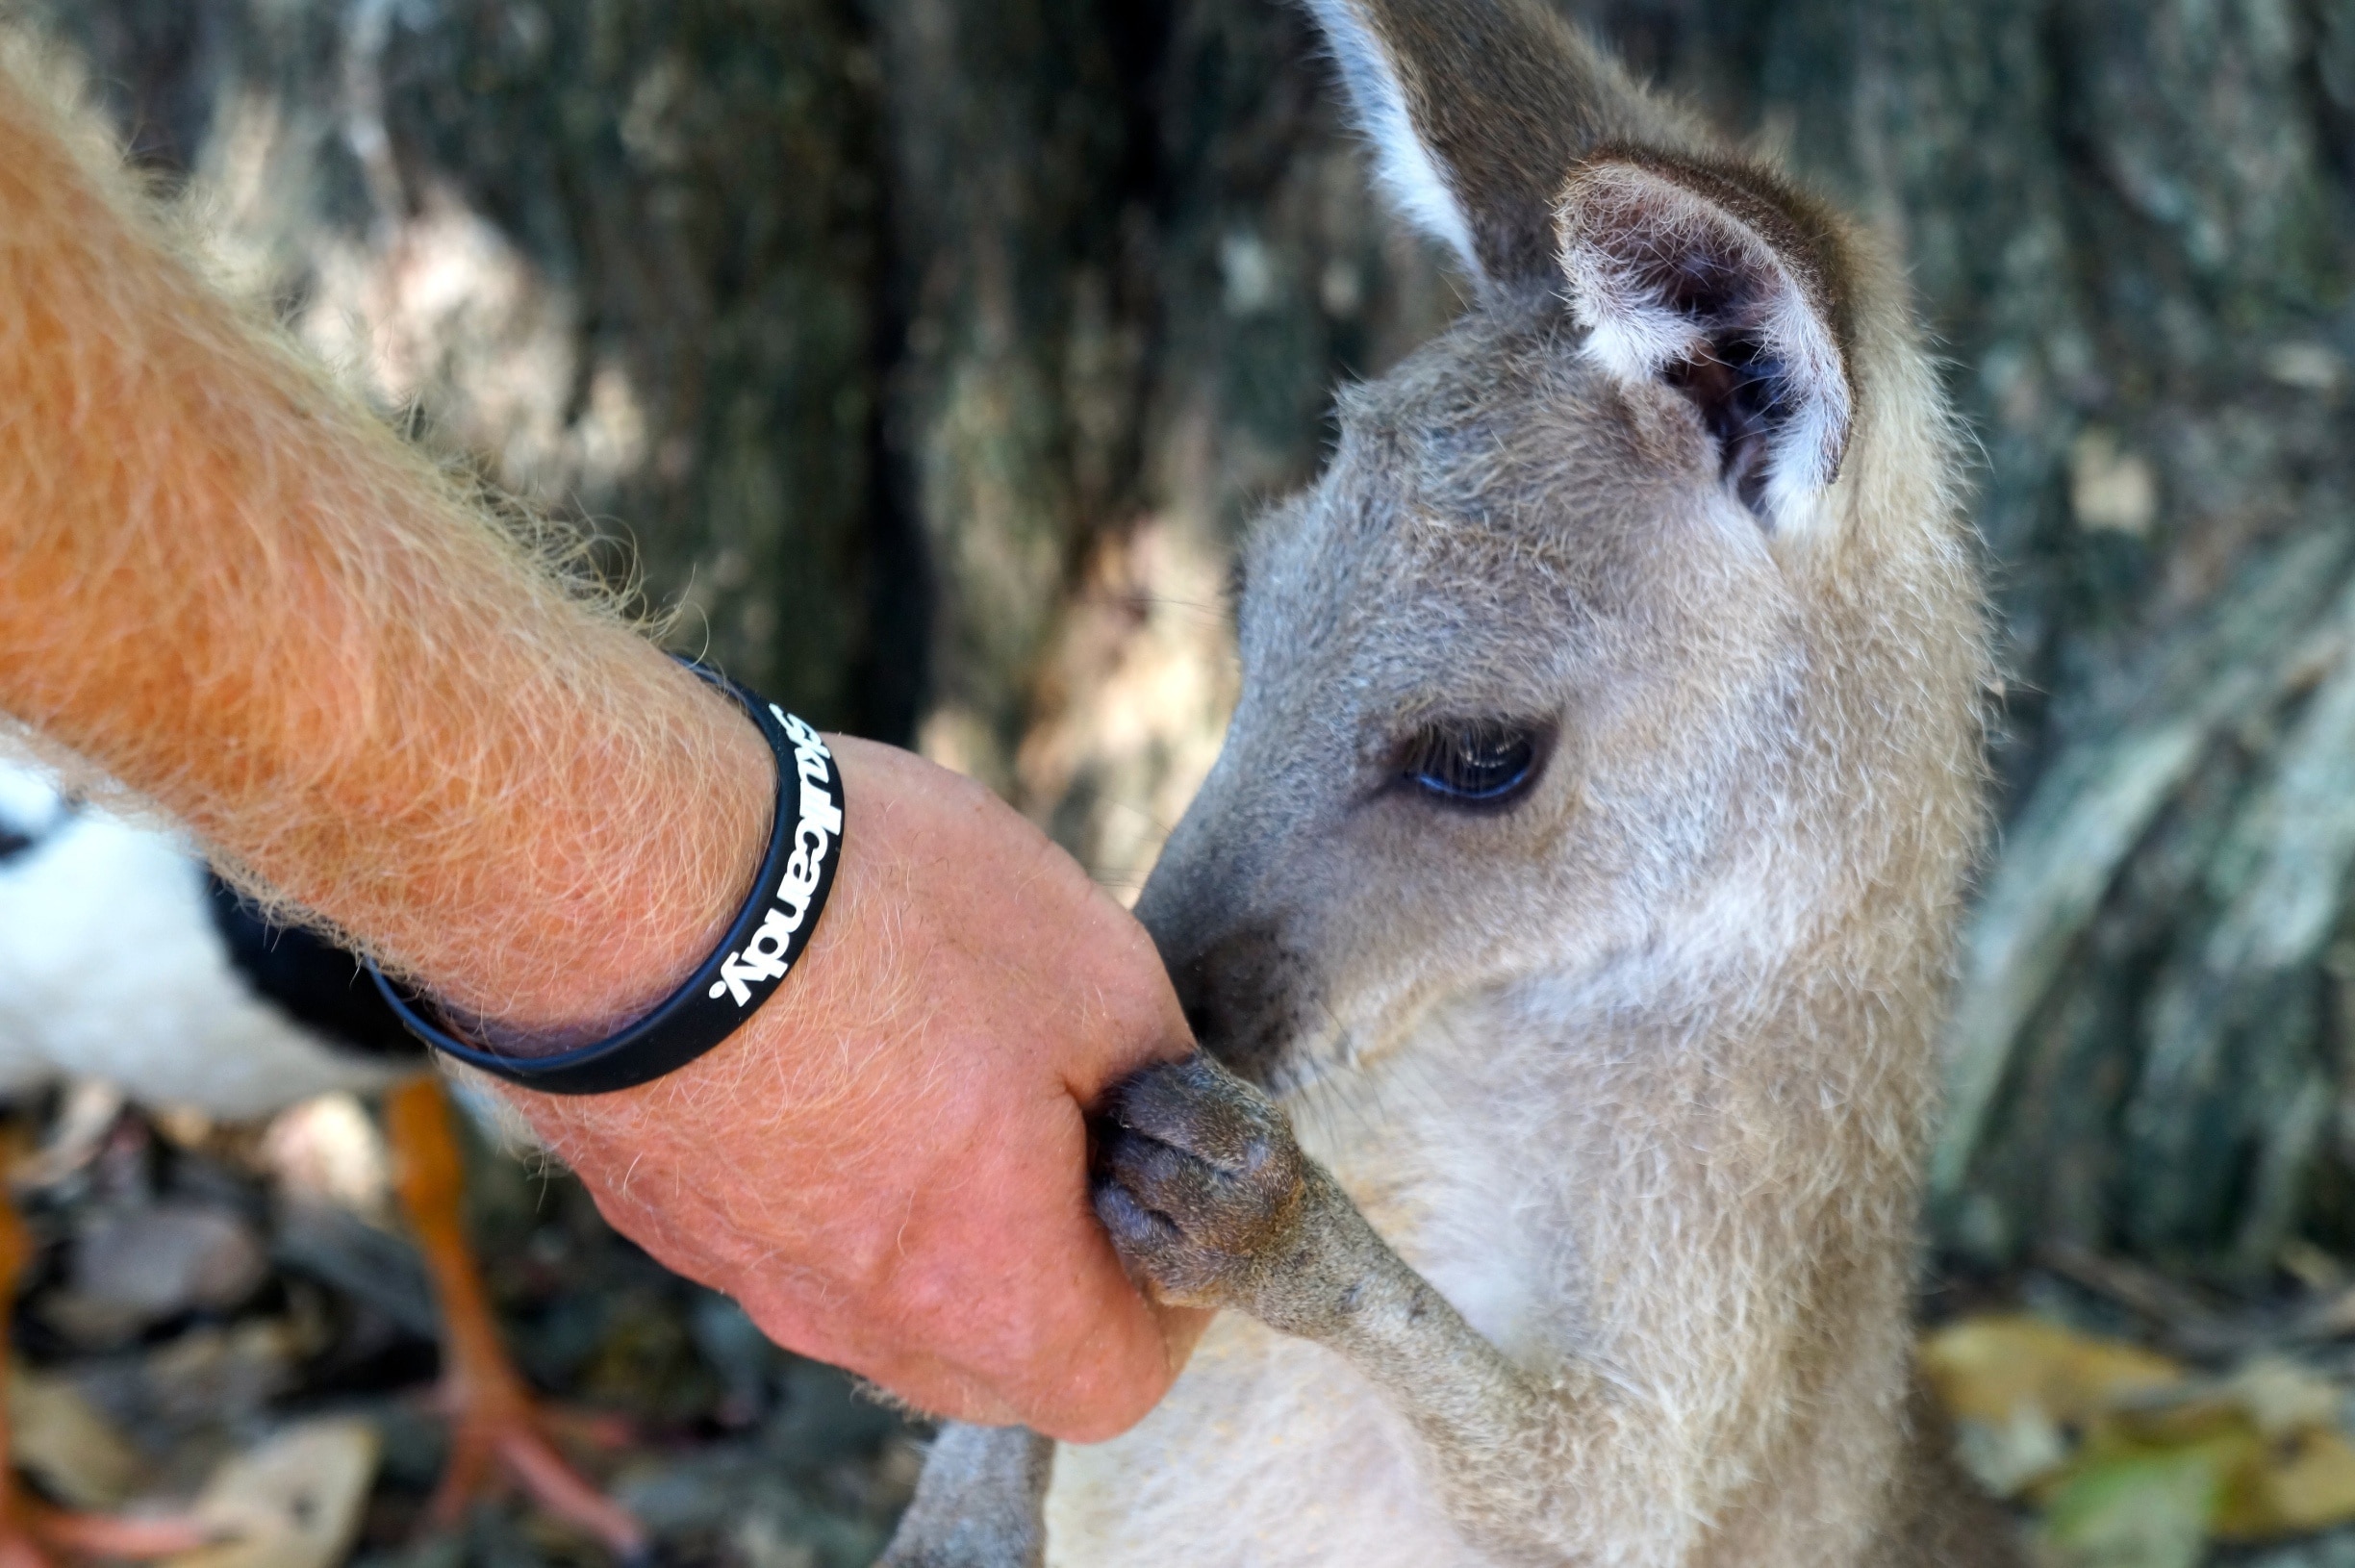 Want to make friends with an insanely cute wallaby? The Wildlife Habitat in Port Douglas has a huge outdoor area where you can feed wallabies and kangaroos with special pellets! How cute!

www.cheskiesgaplife.com